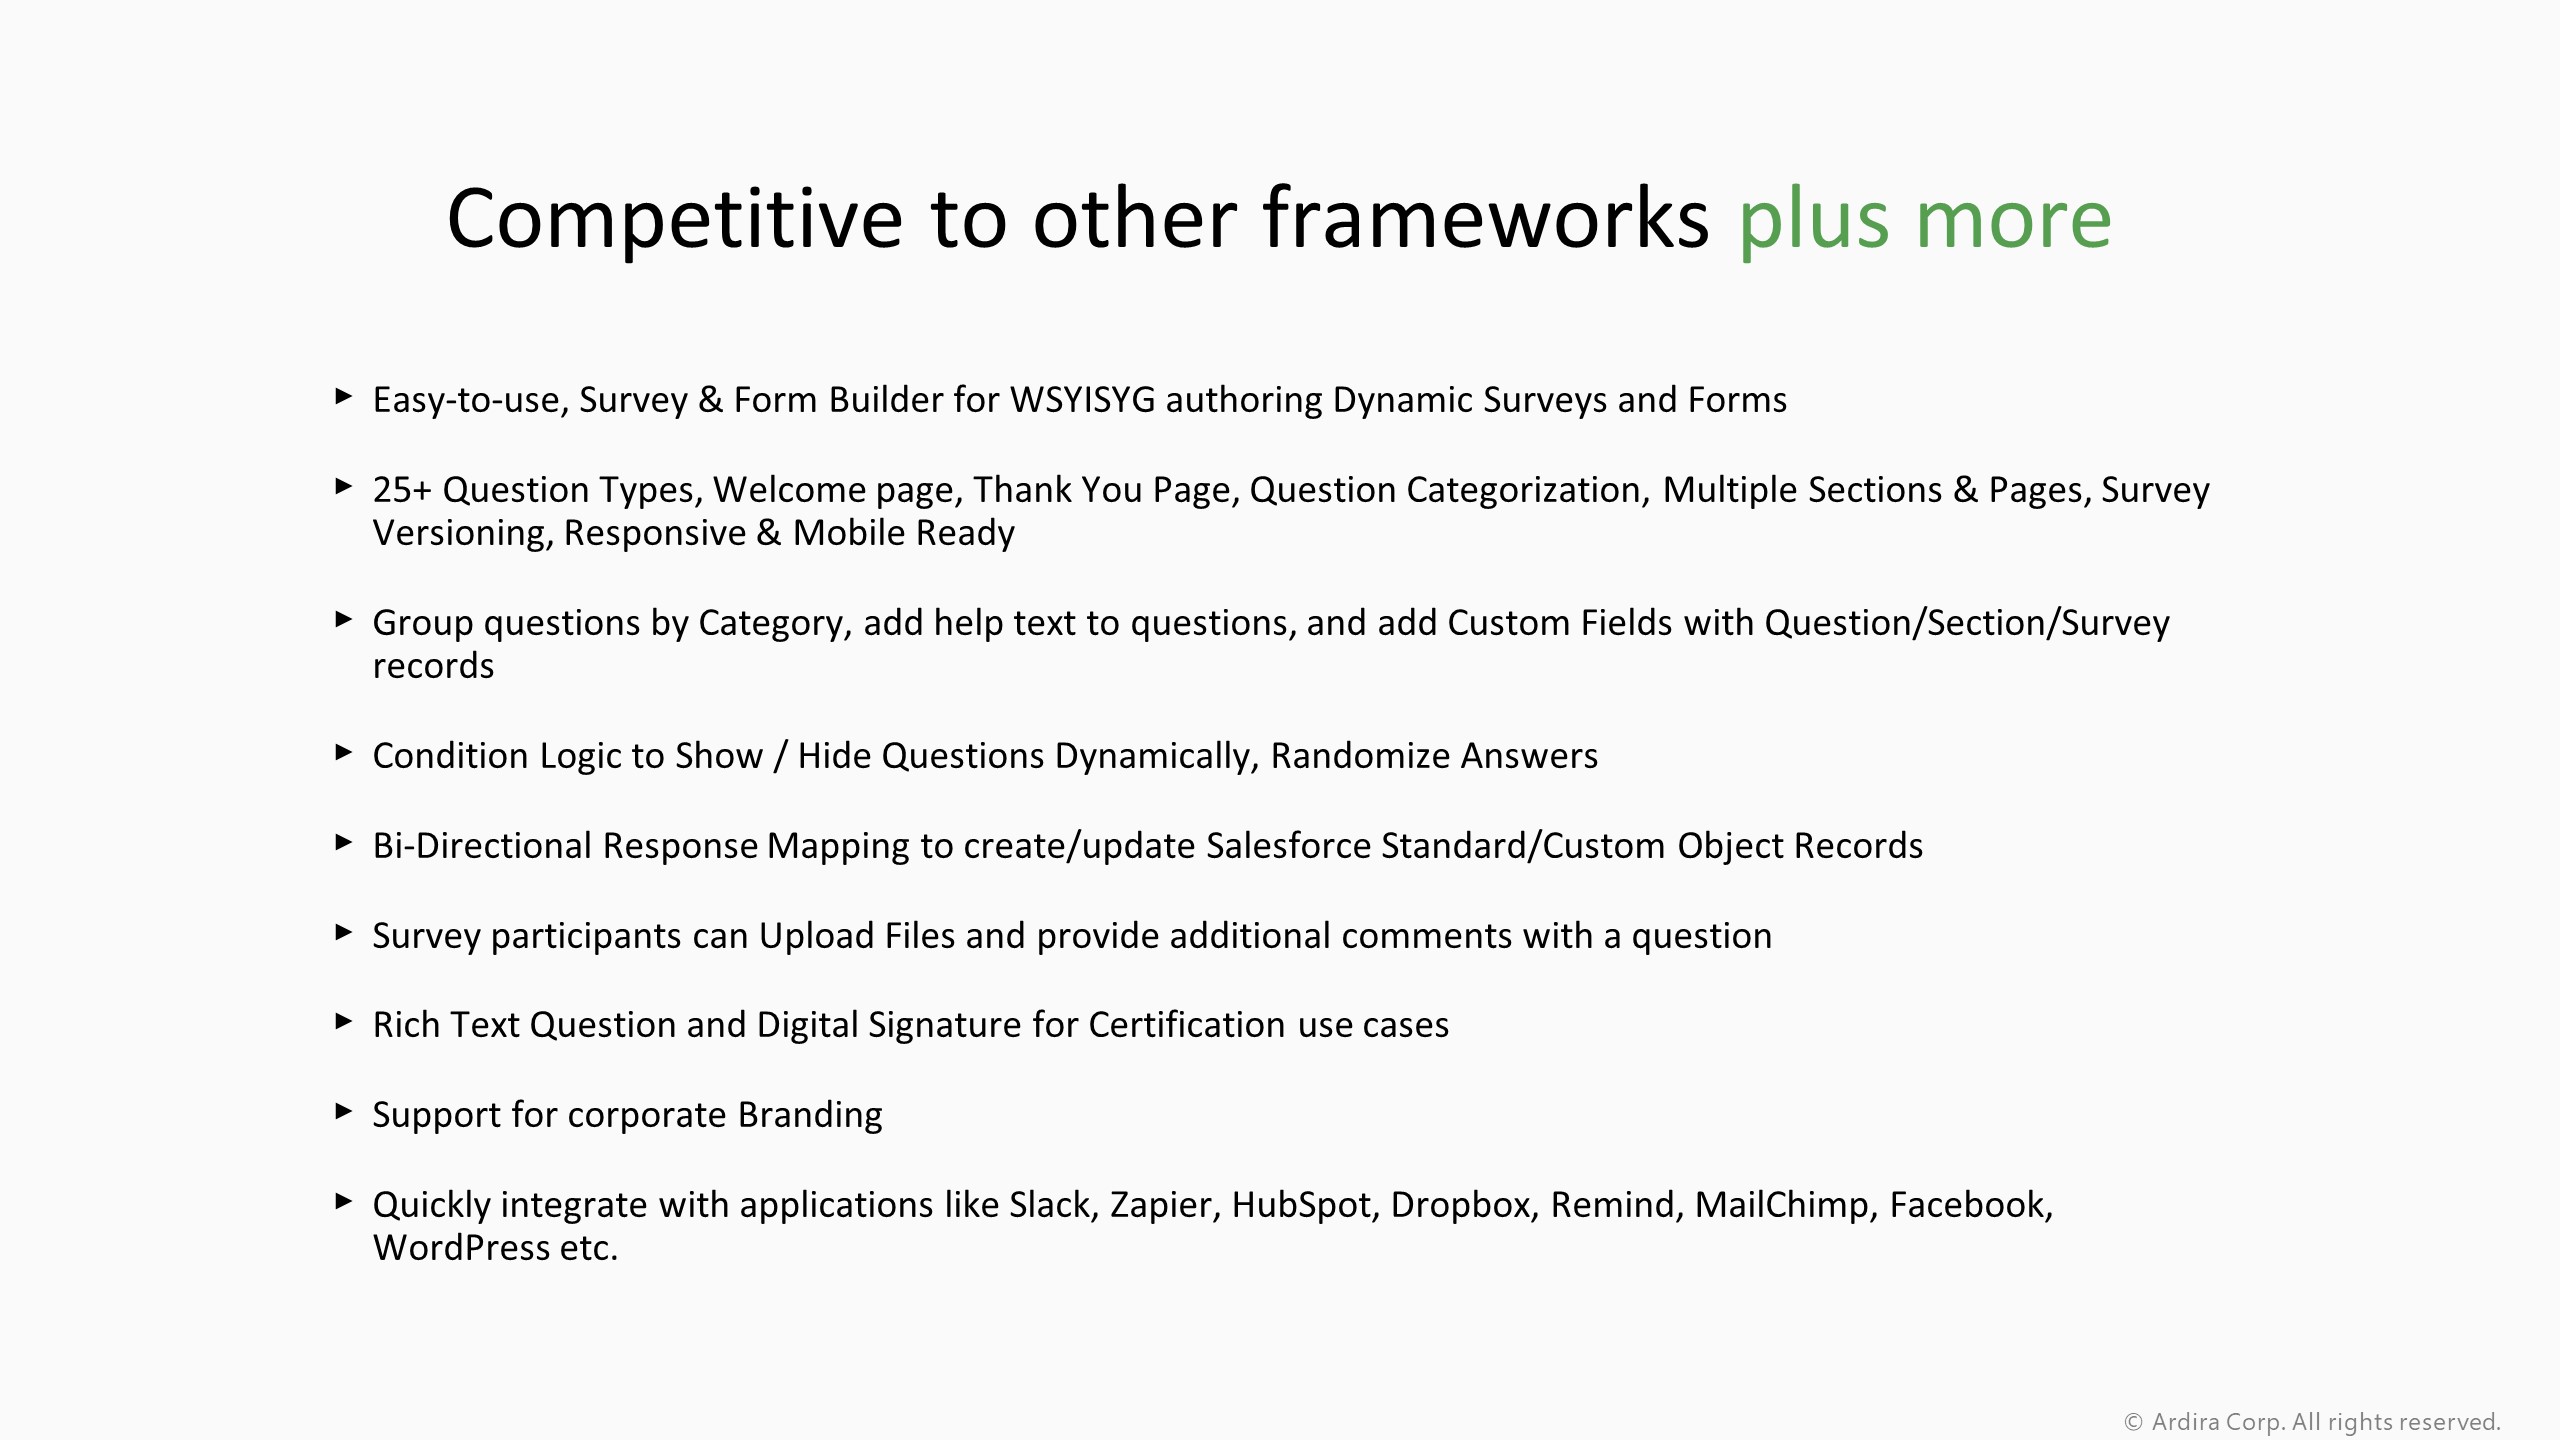 Competitive to other frameworks plus more